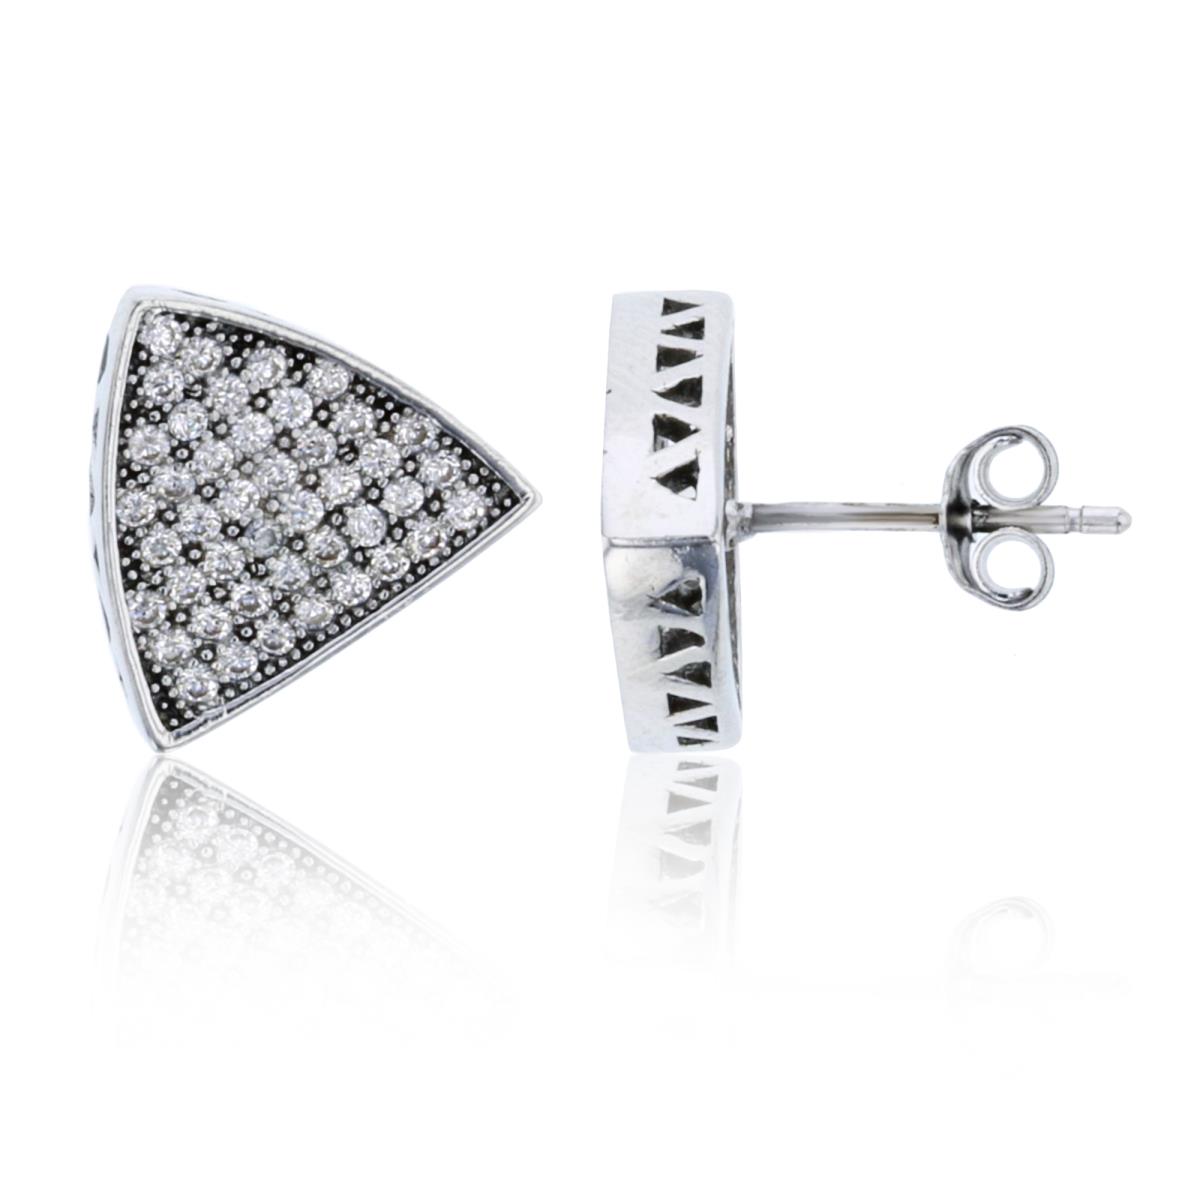 Sterling Silver Rhodium 12.4x11mm Micropave Triangle Stud Earring